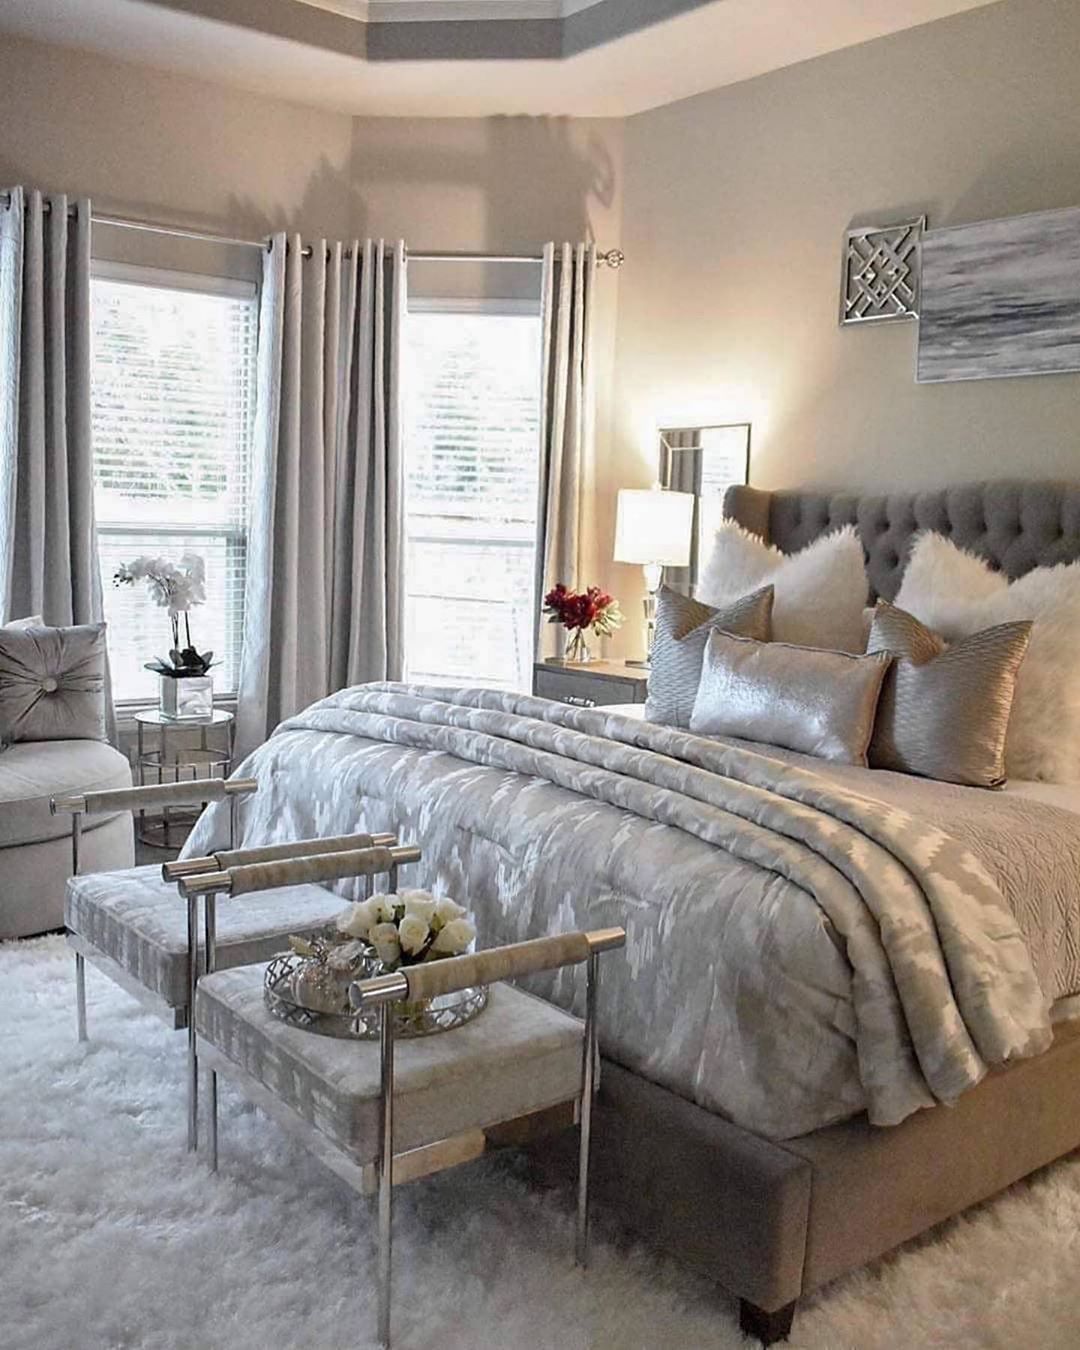 These 15 Bedroom Makeover Ideas Will Transform Your Bedroom!